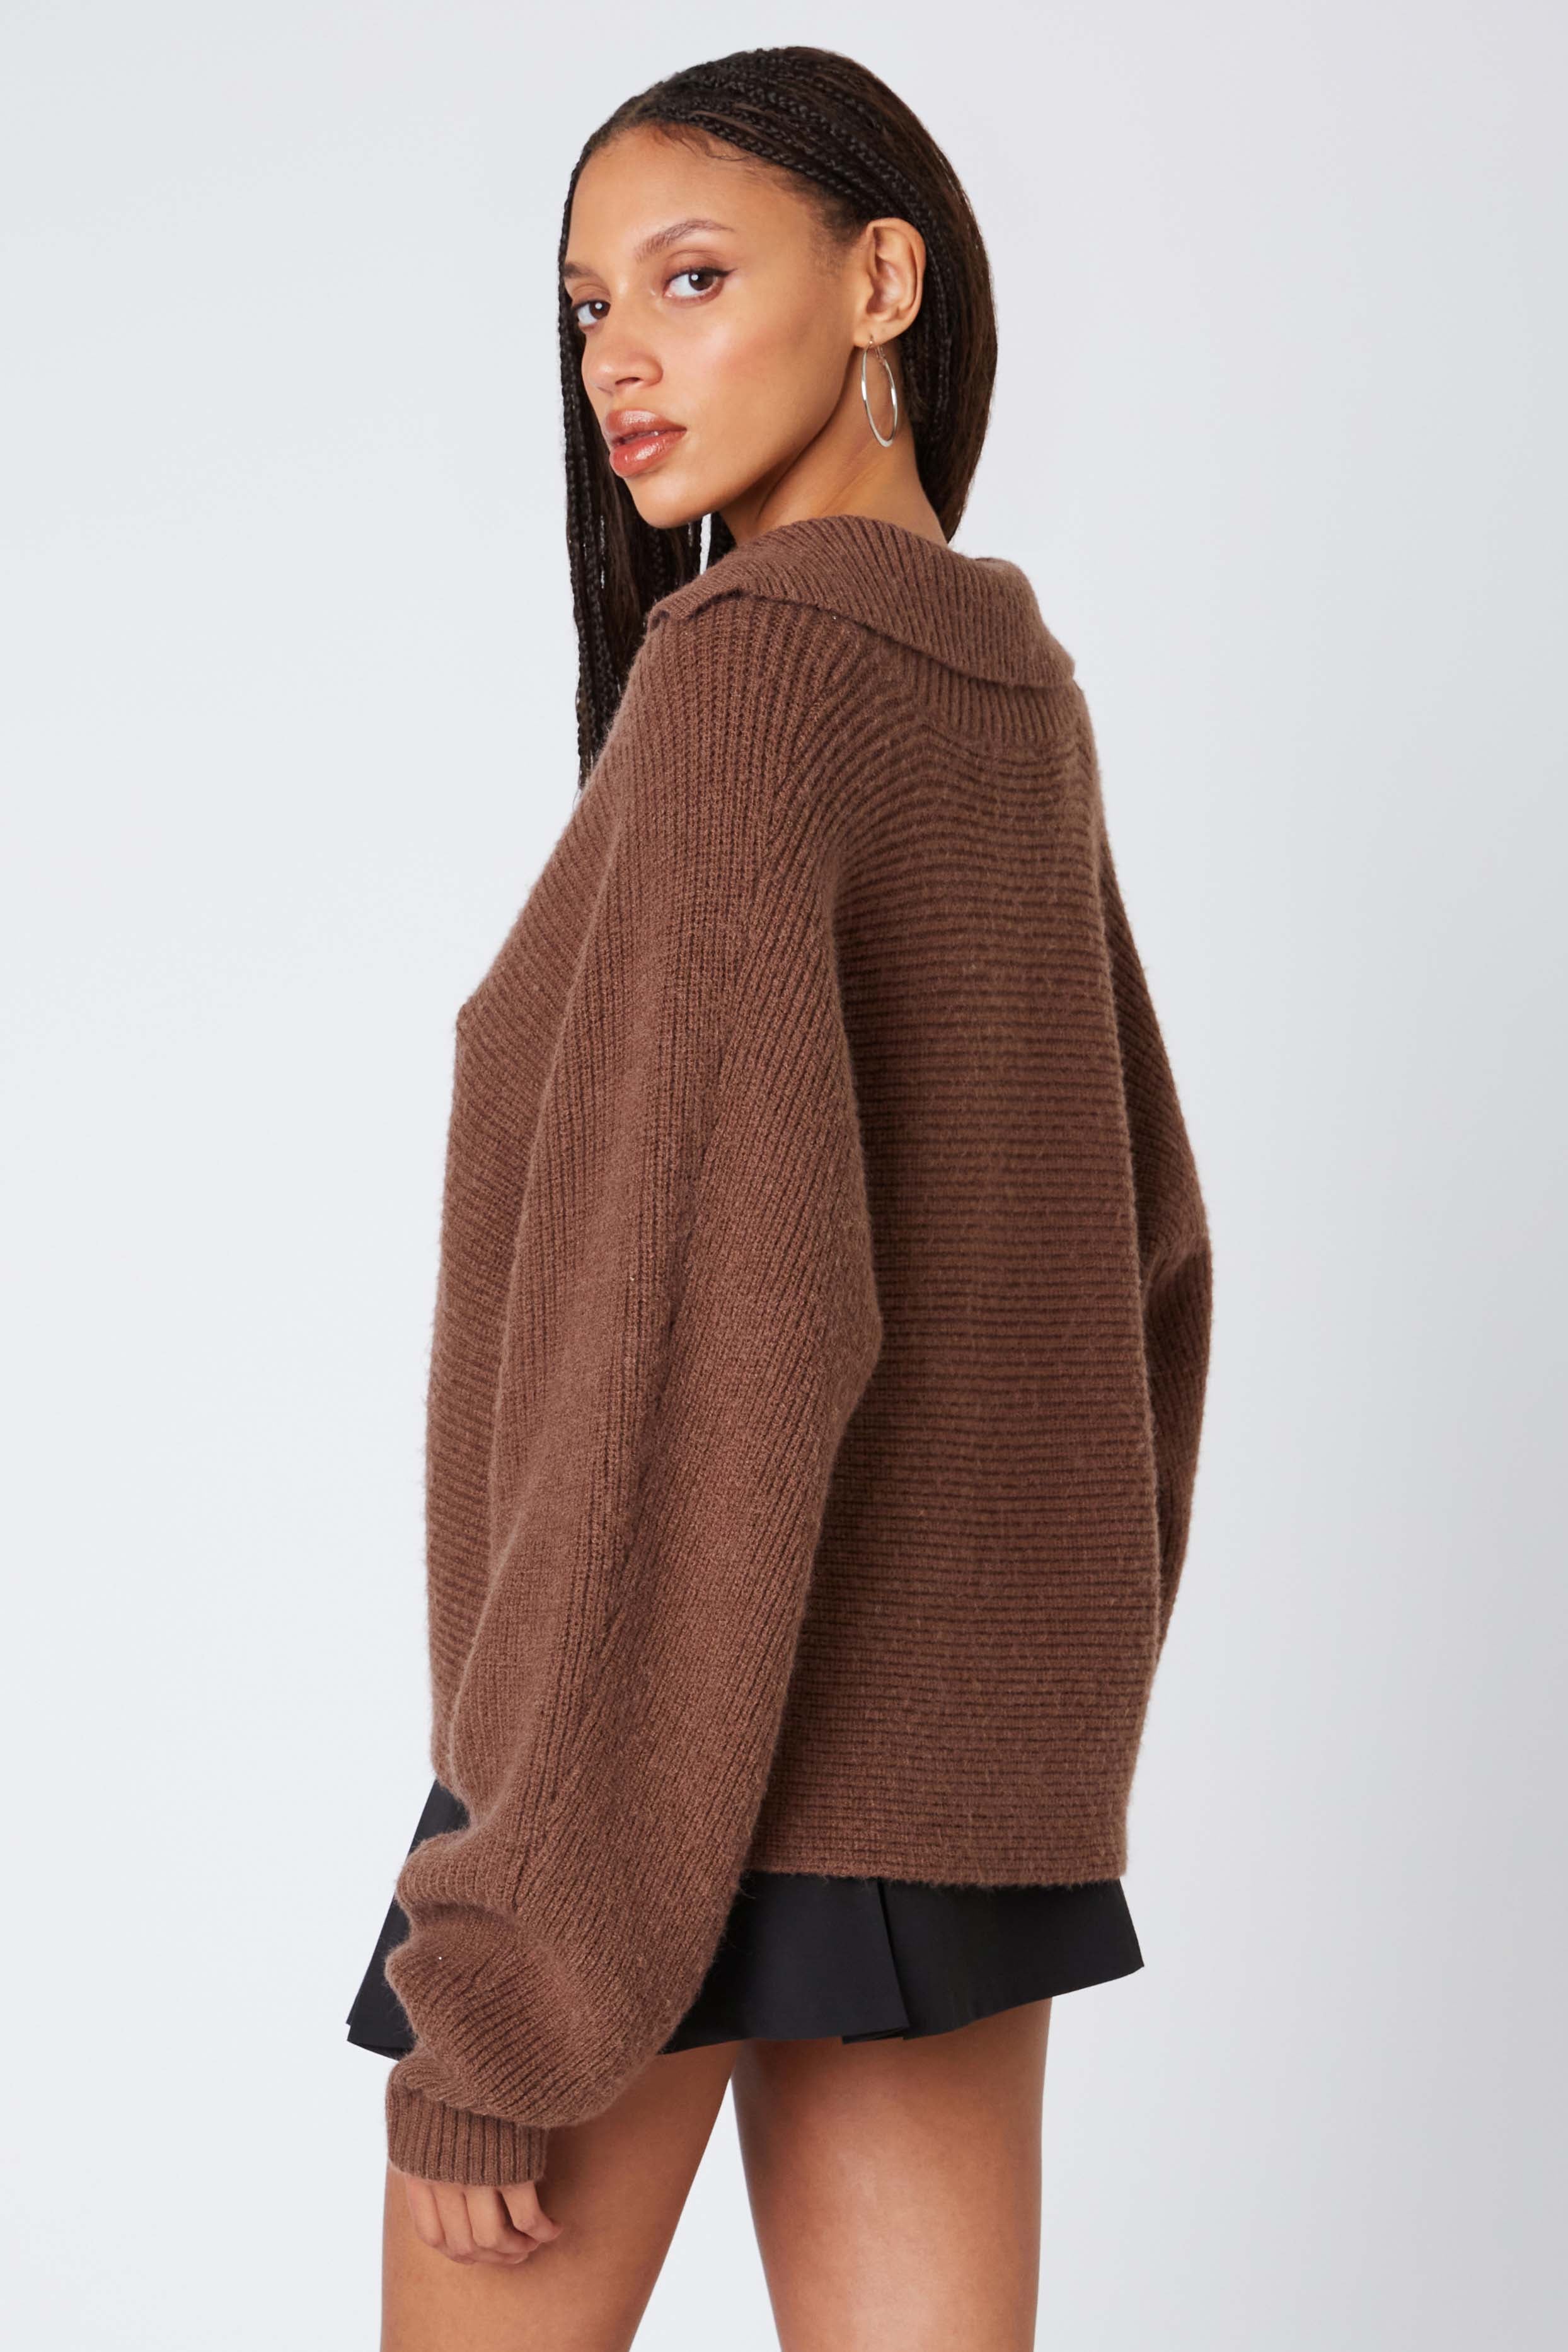 Oversized Polo Sweater in Cocoa Back View